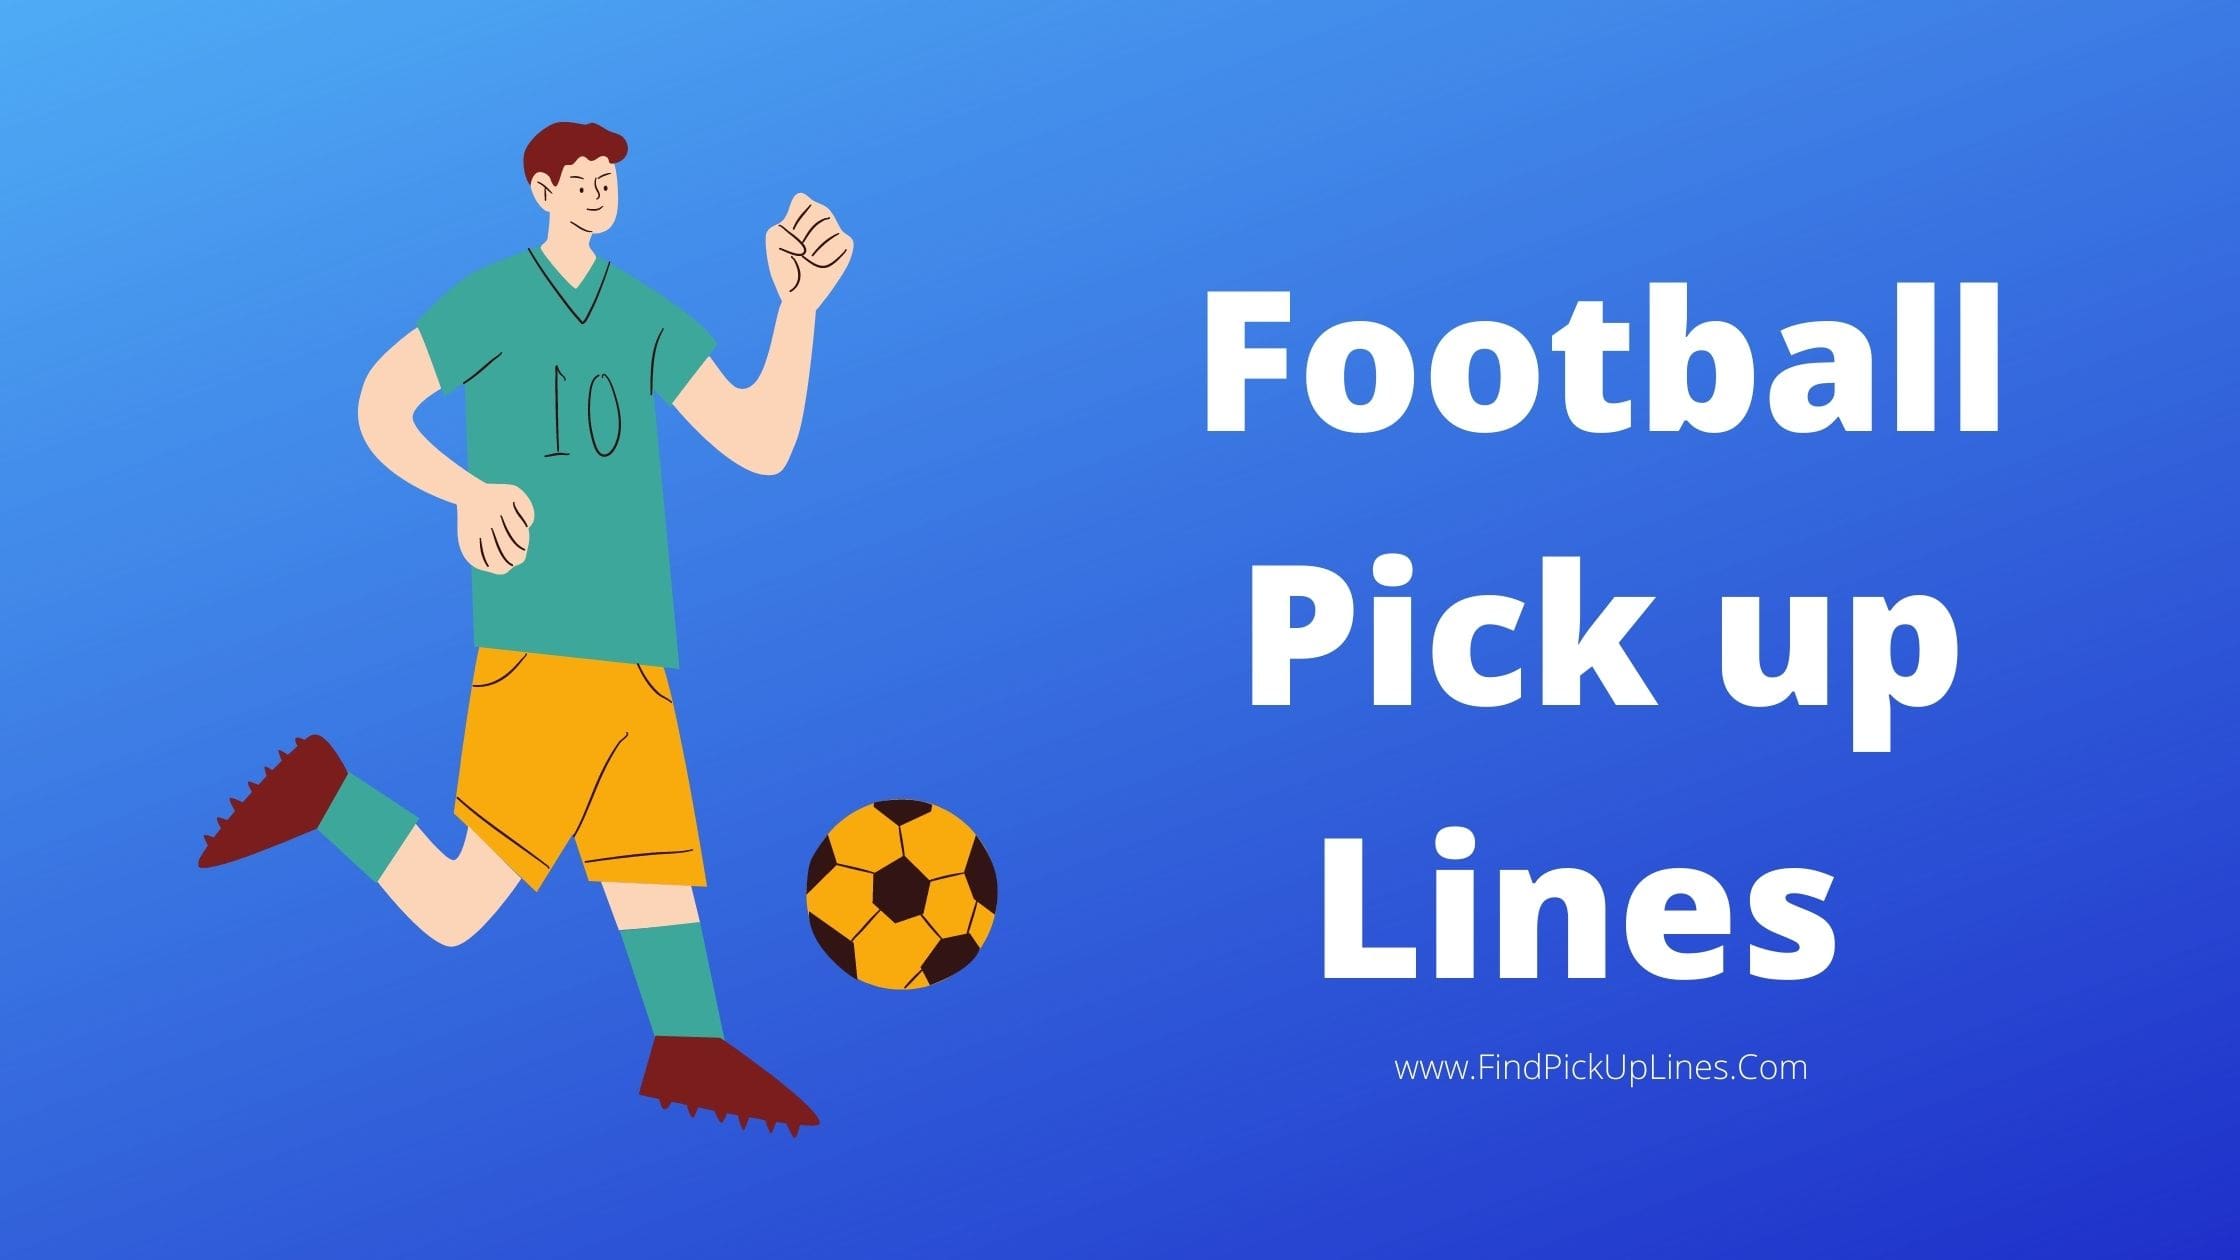 Football pick up lines to use on girls funny pick up lines did you just fart